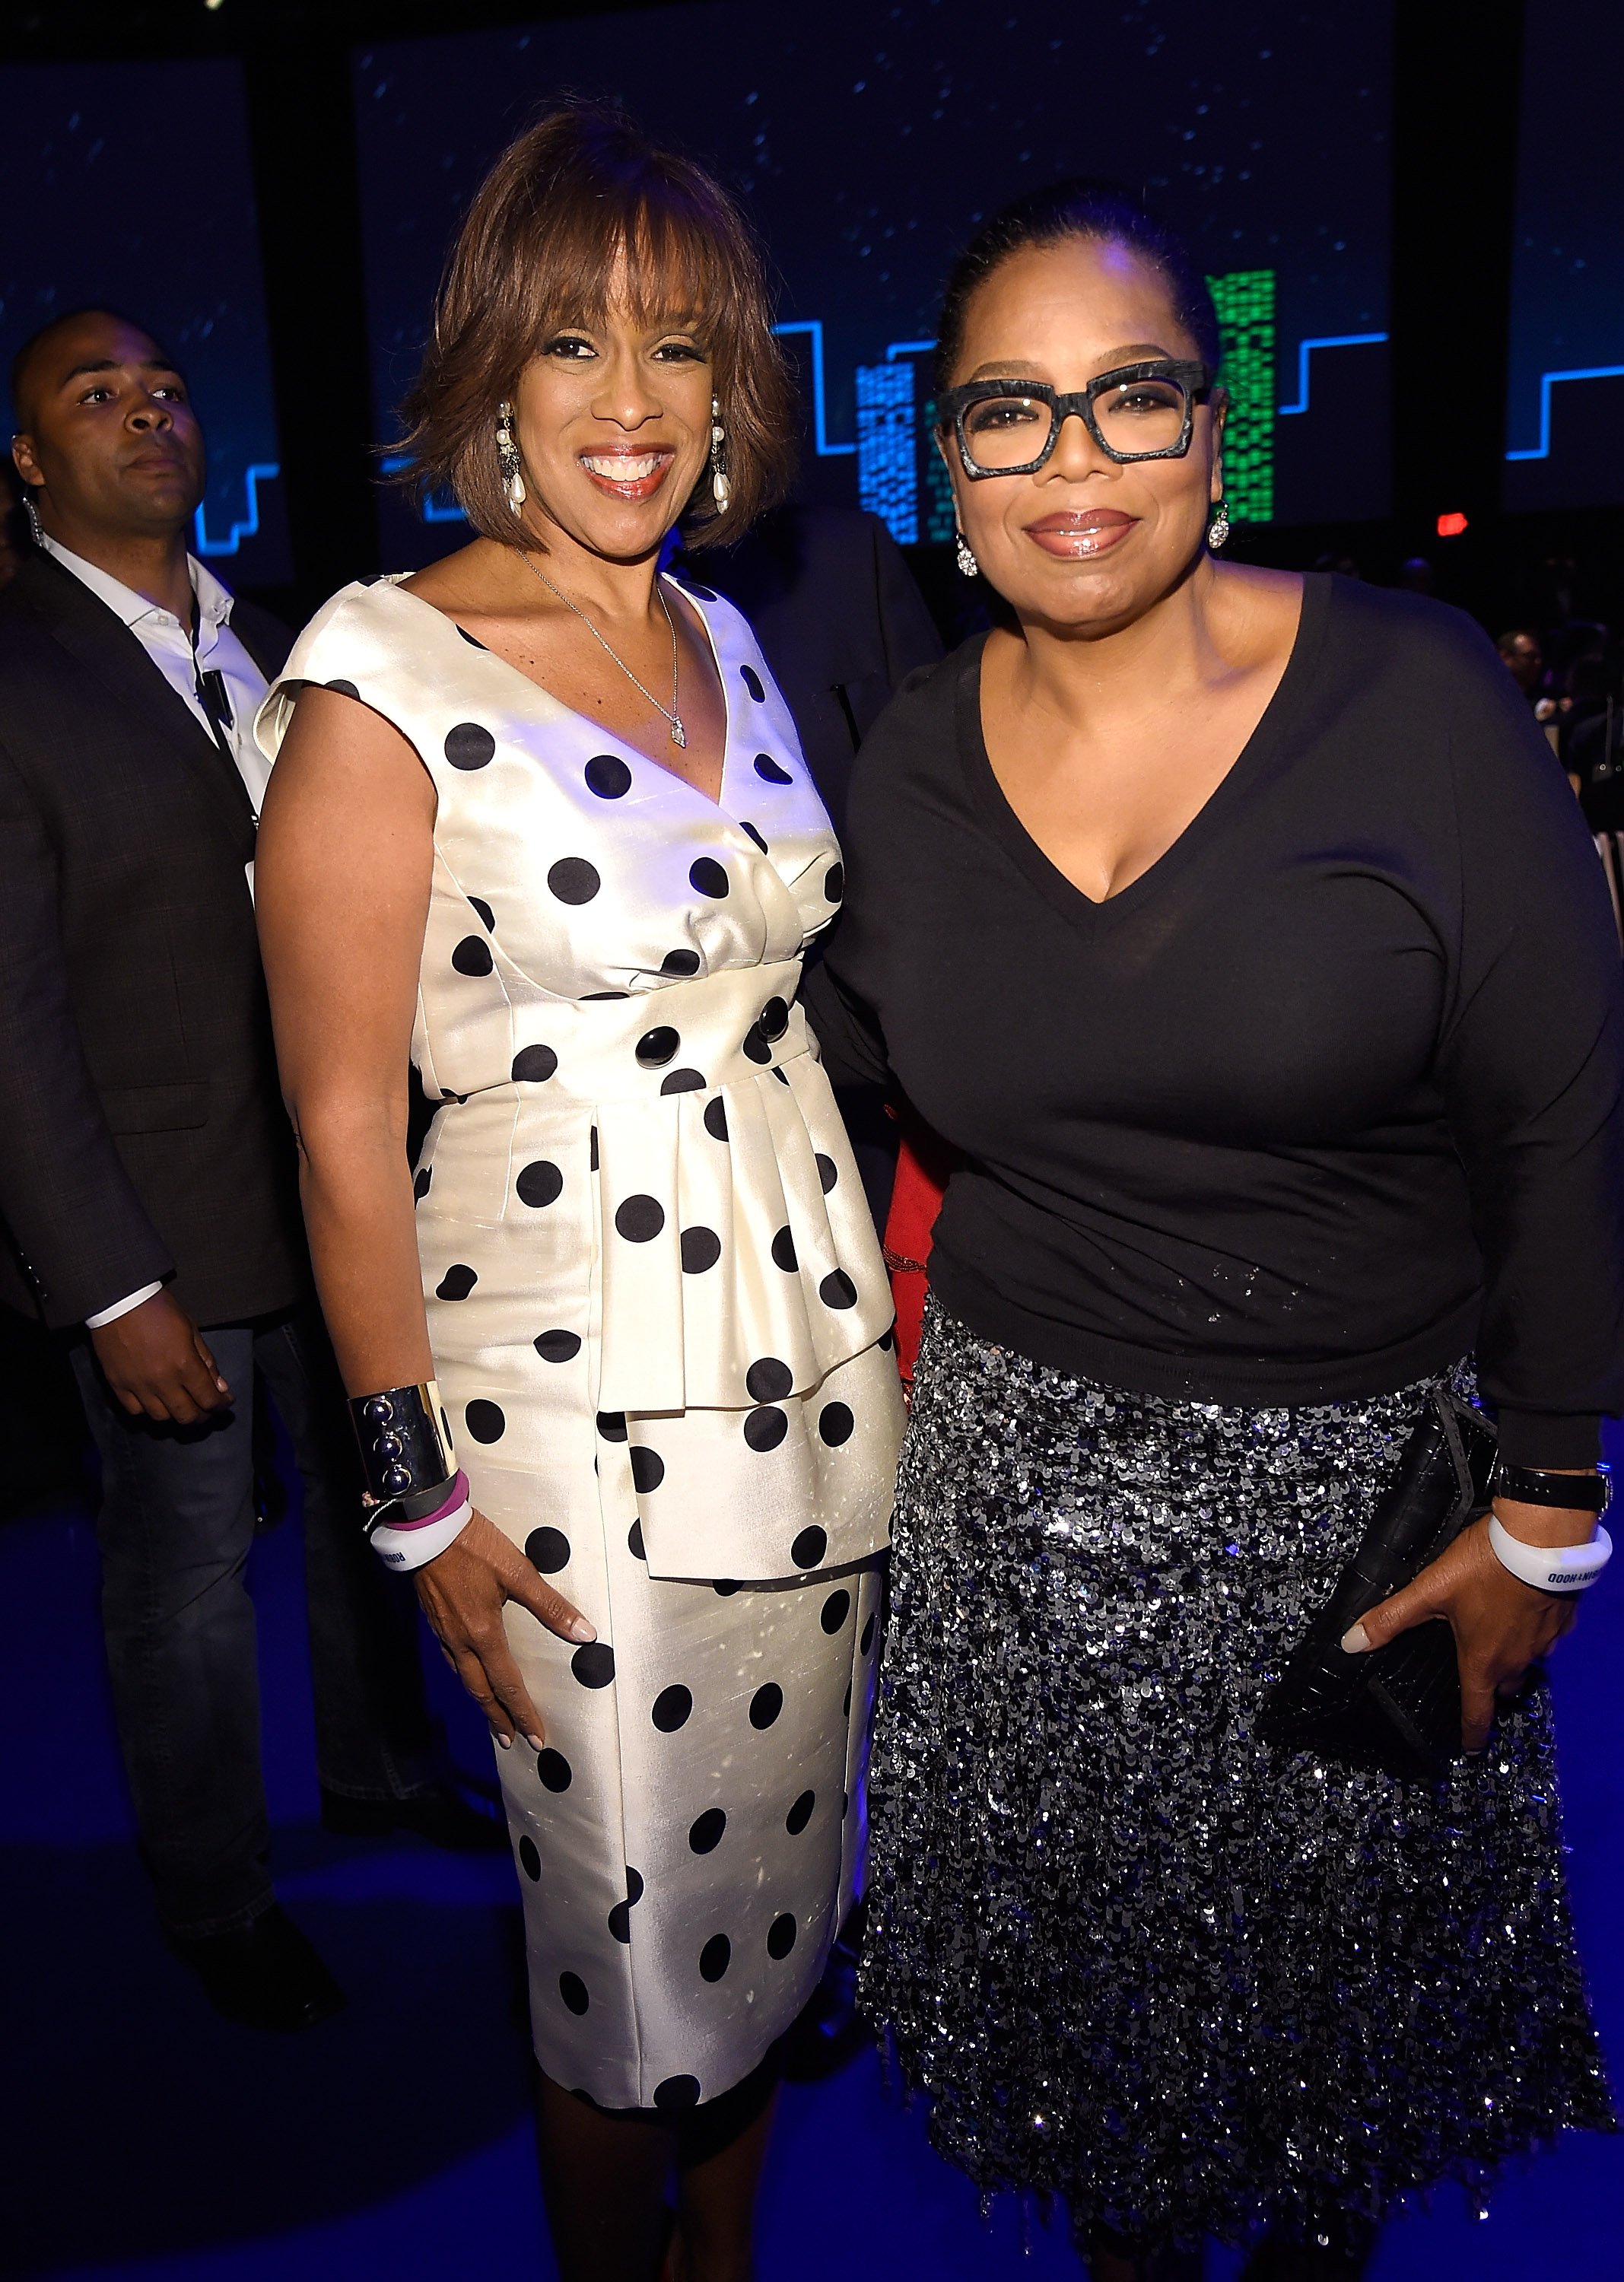 Best friends Gayle King and Oprah Winfrey at The Robin Hood Foundation's 2016 Benefit in May 2016. | Photo: Getty Images